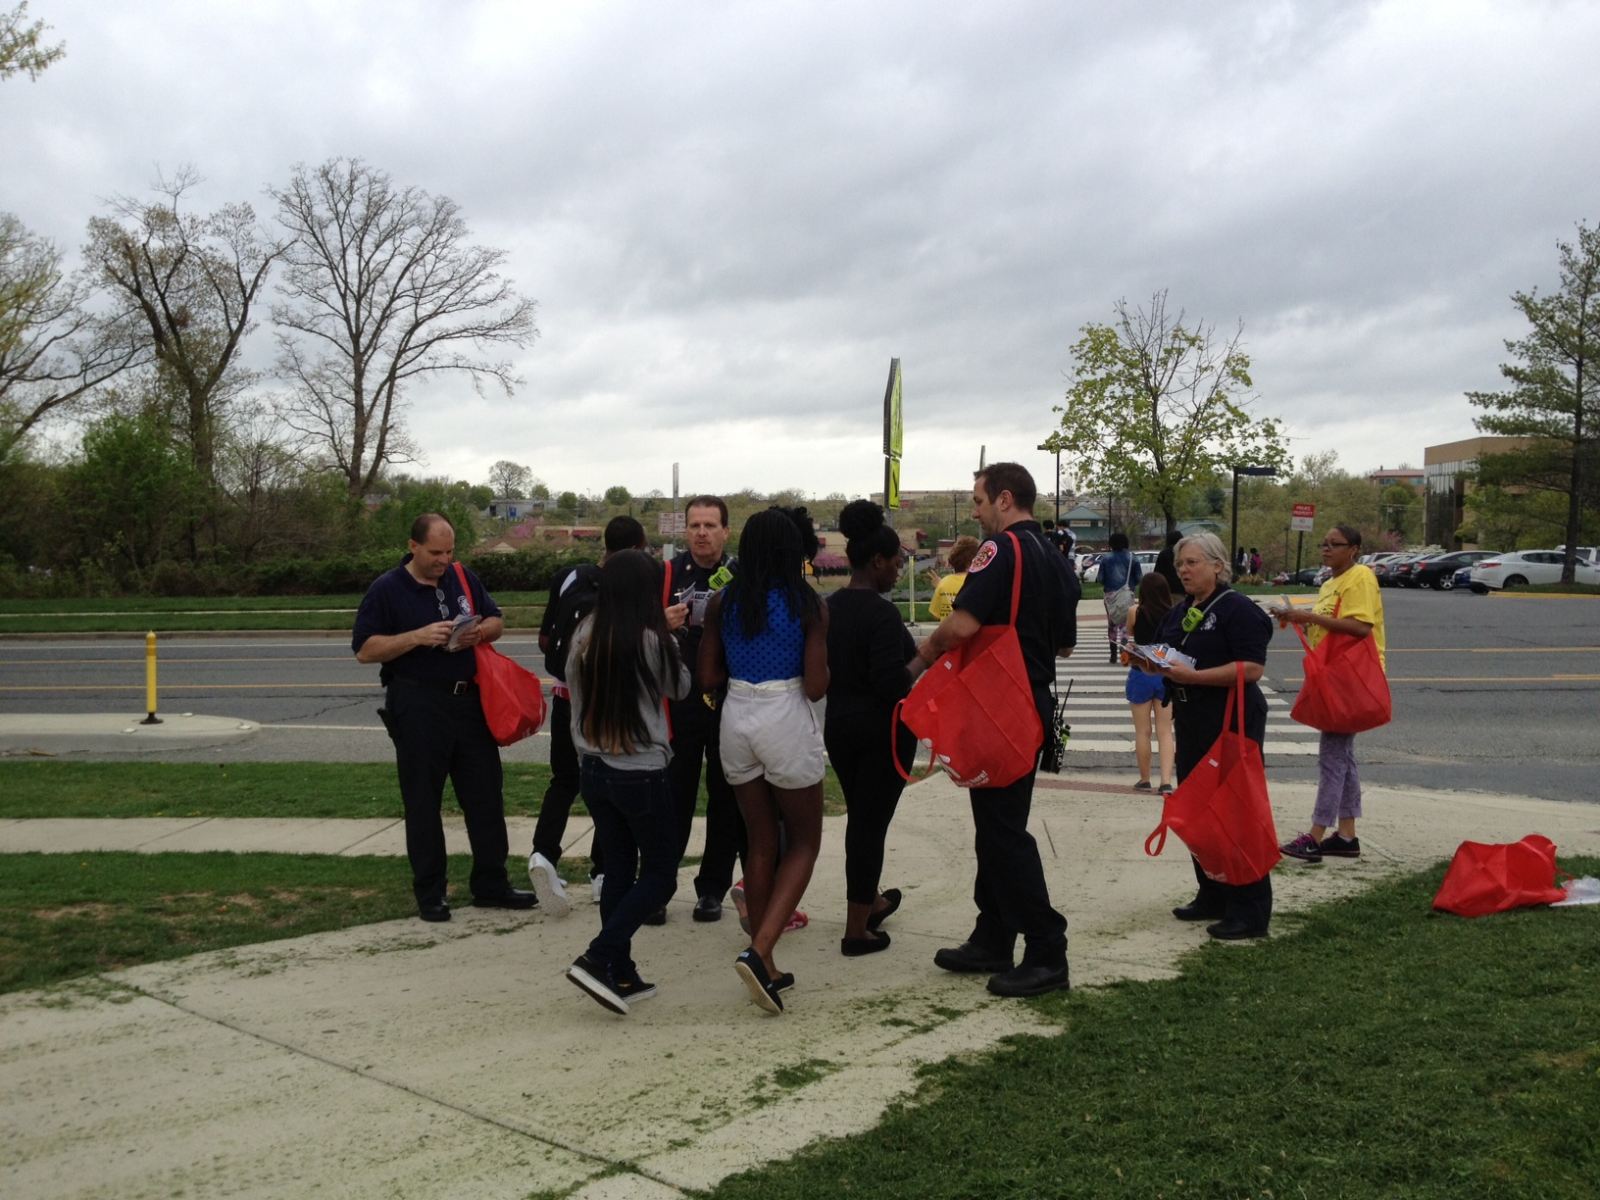 Montgomery County Fire and Rescue Station 22 Distributing Reflective Materials to Students at Seneca Valley High School